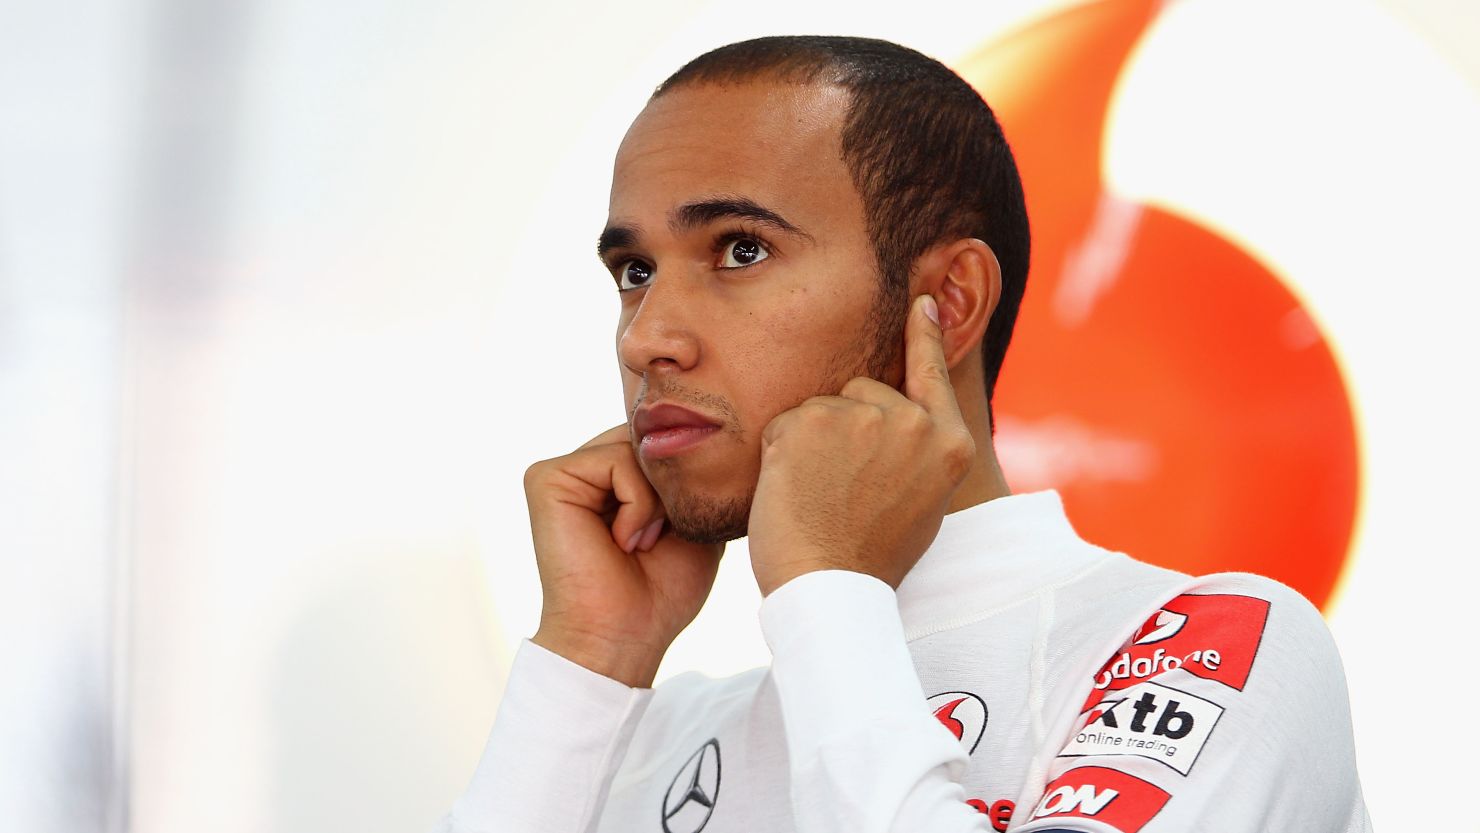 Lewis Hamilton won the 2008 Formula One drivers' championship but is fifth this season.